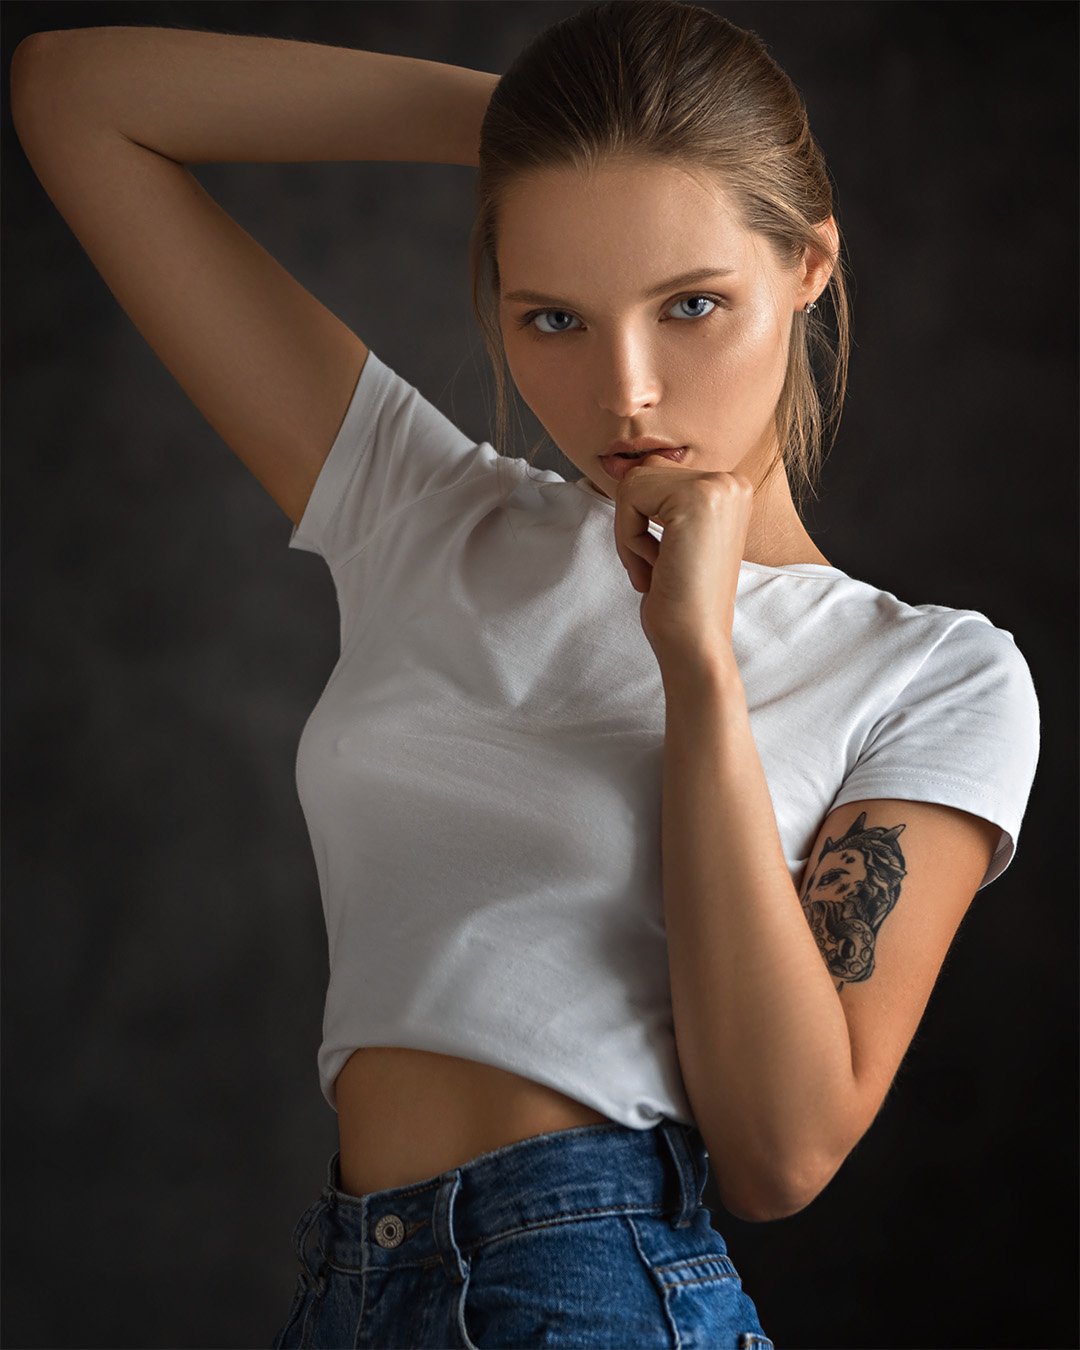 Evgeny Sibiraev Women Model Gray Eyes Arms Behind Head Jeans White Tops Finger On Lips Inked Girls B 1080x1350